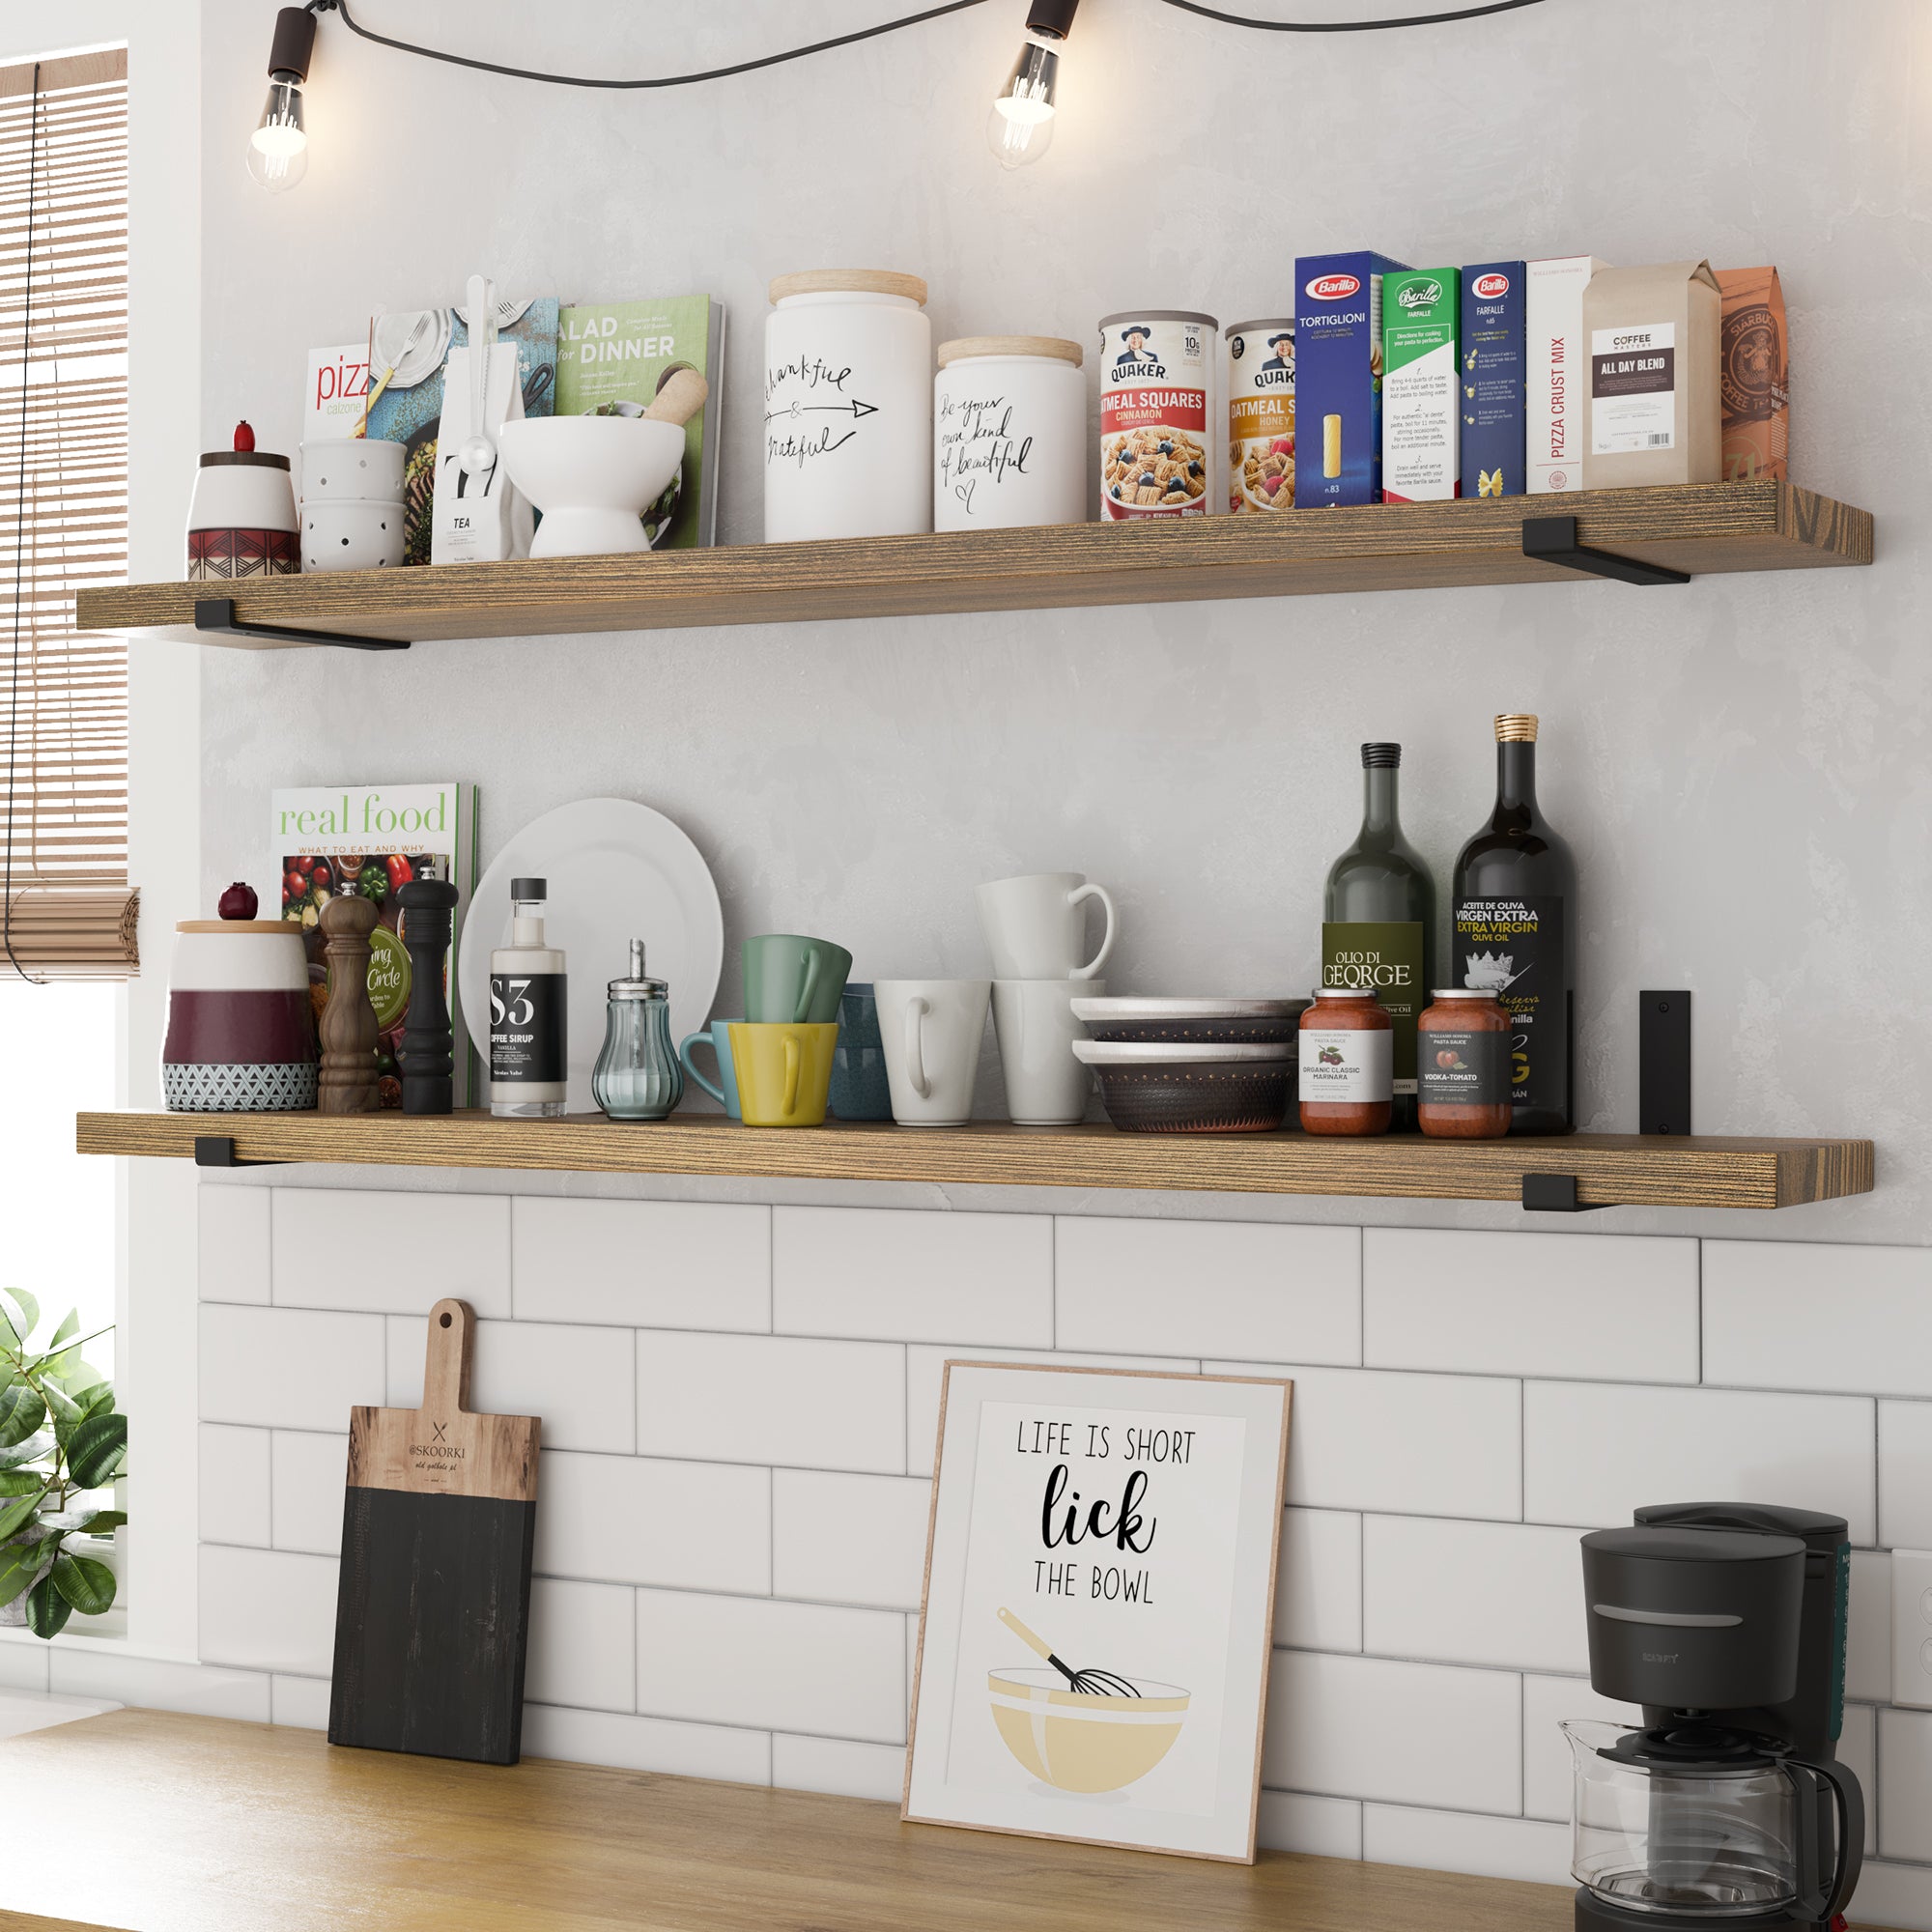 Kitchen shelf filled with various foods and utensils, featuring a white subway tile backdrop, offering a lively and practical space.